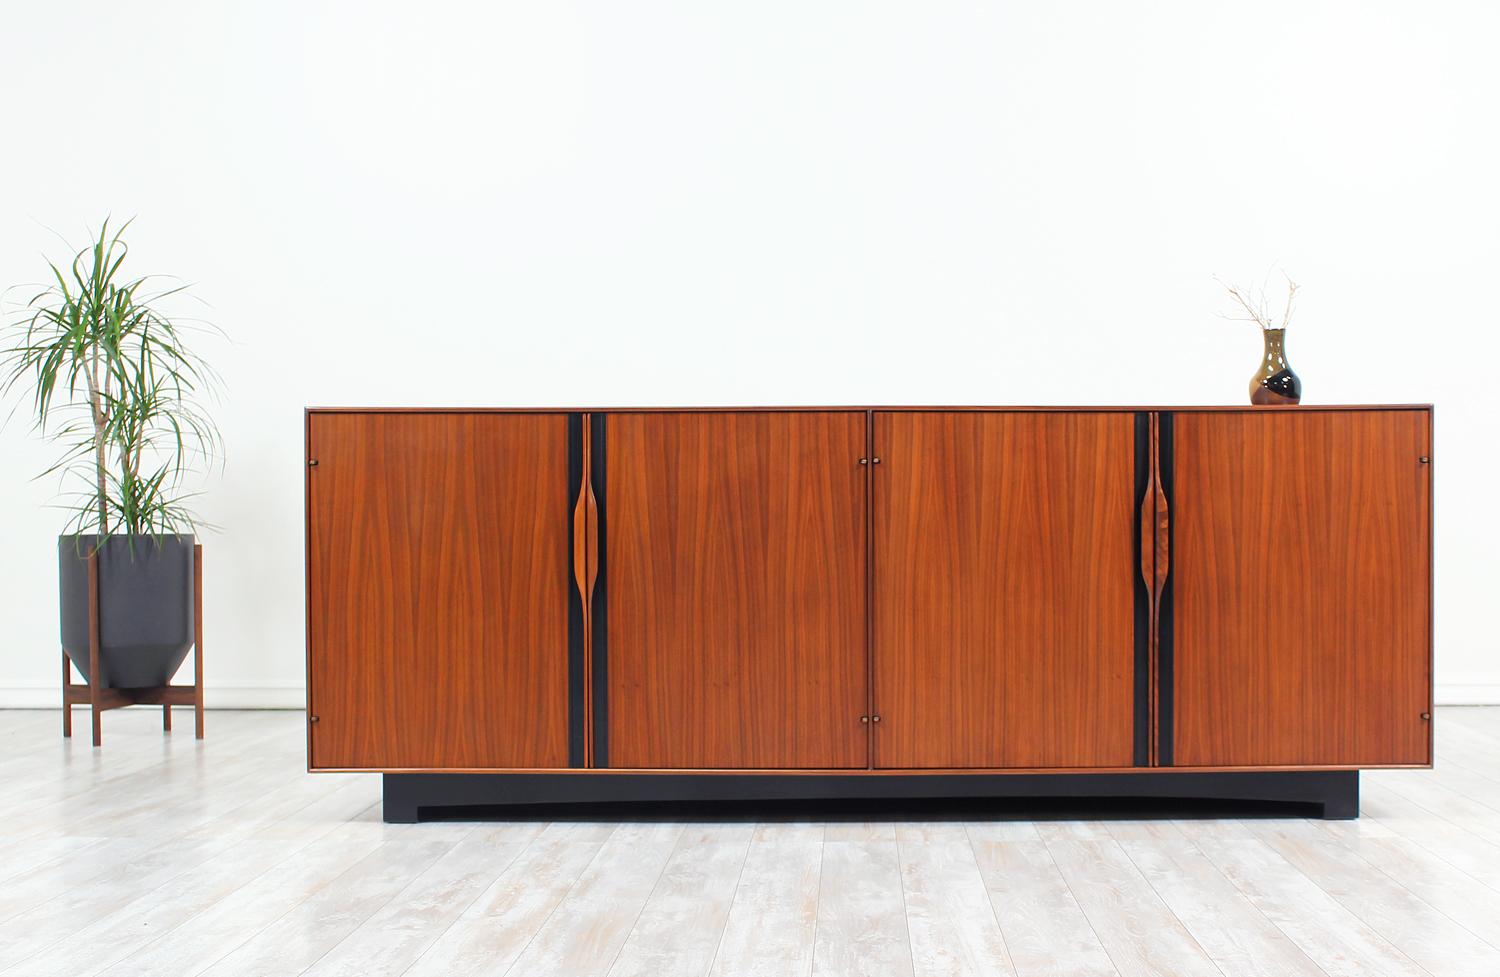 Mid-Century credenza designed by John Kapel for Glenn of California in the United States circa 1950’s. Beautifully crafted in walnut wood, this versatile credenza design features the designer’s signature sculpted walnut handles that open to reveal